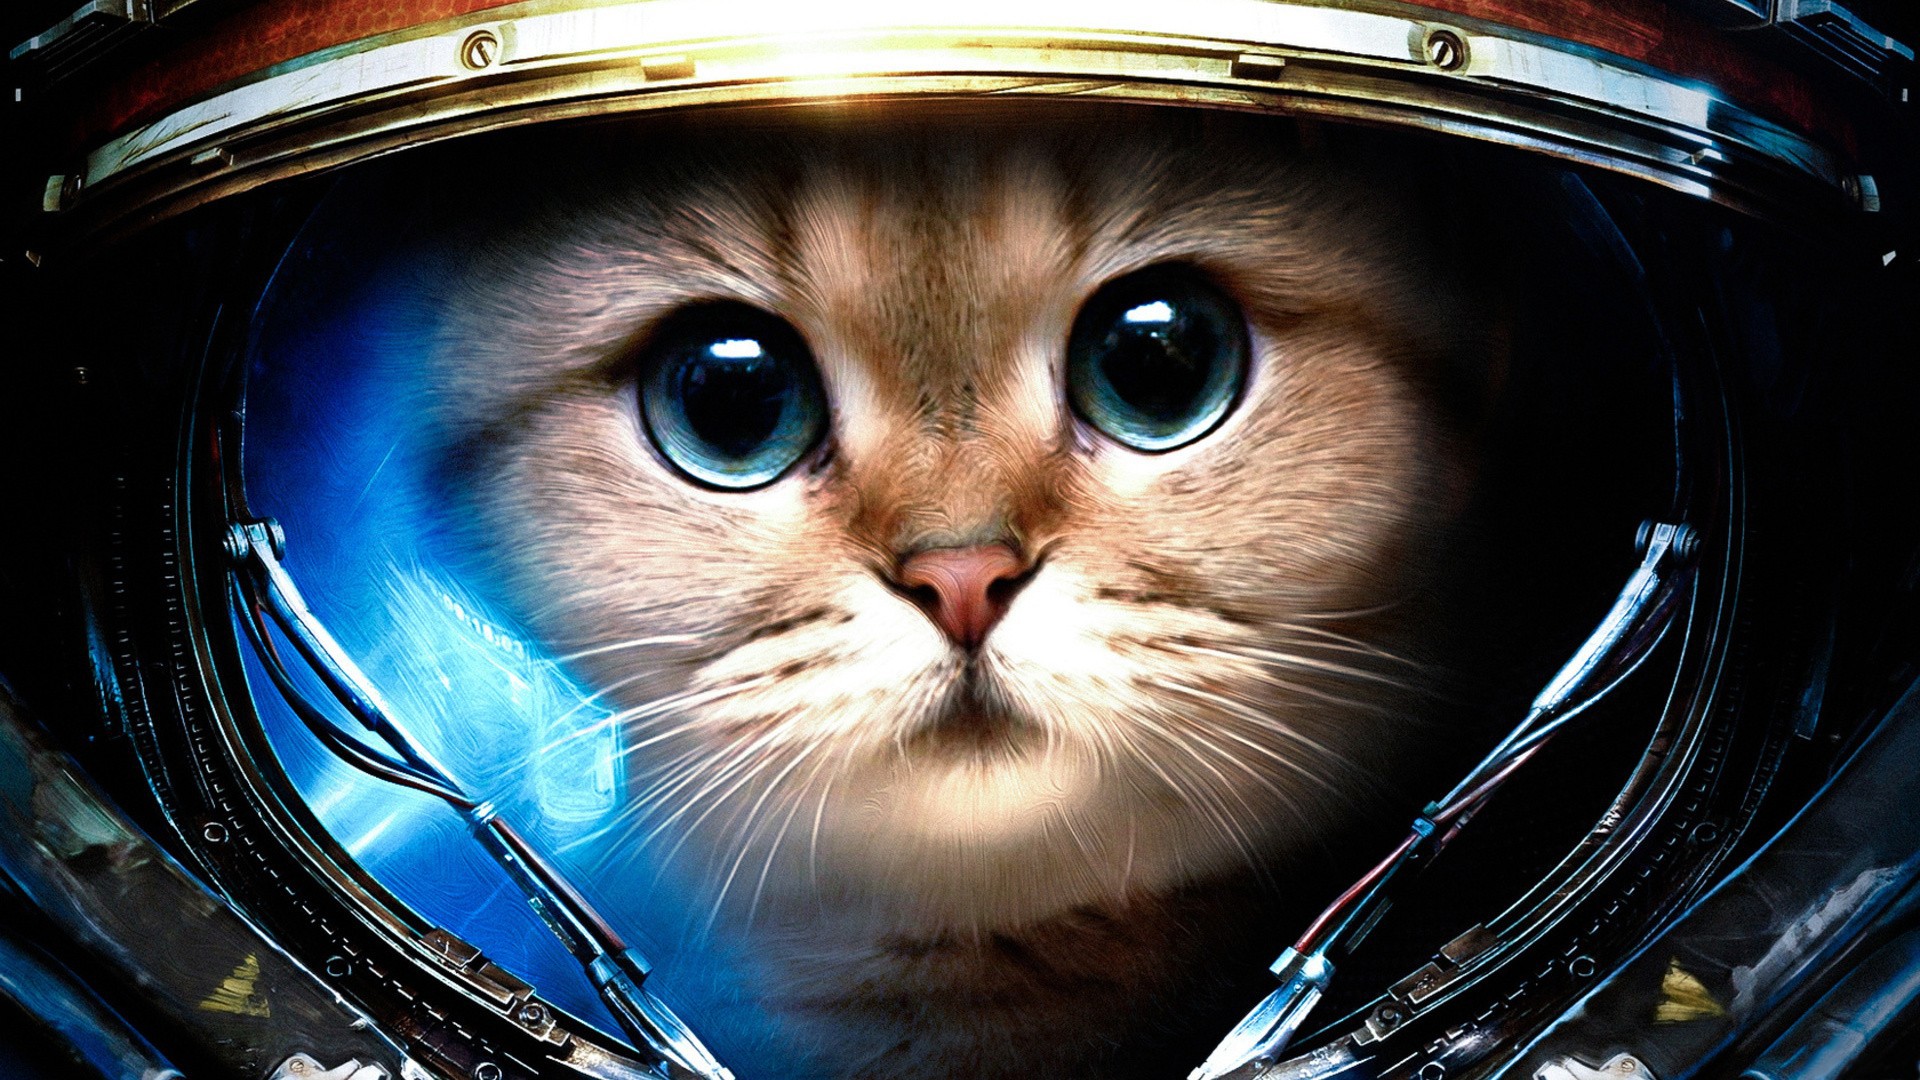 Cat Astronaut Wallpaper And Image Pictures Photos